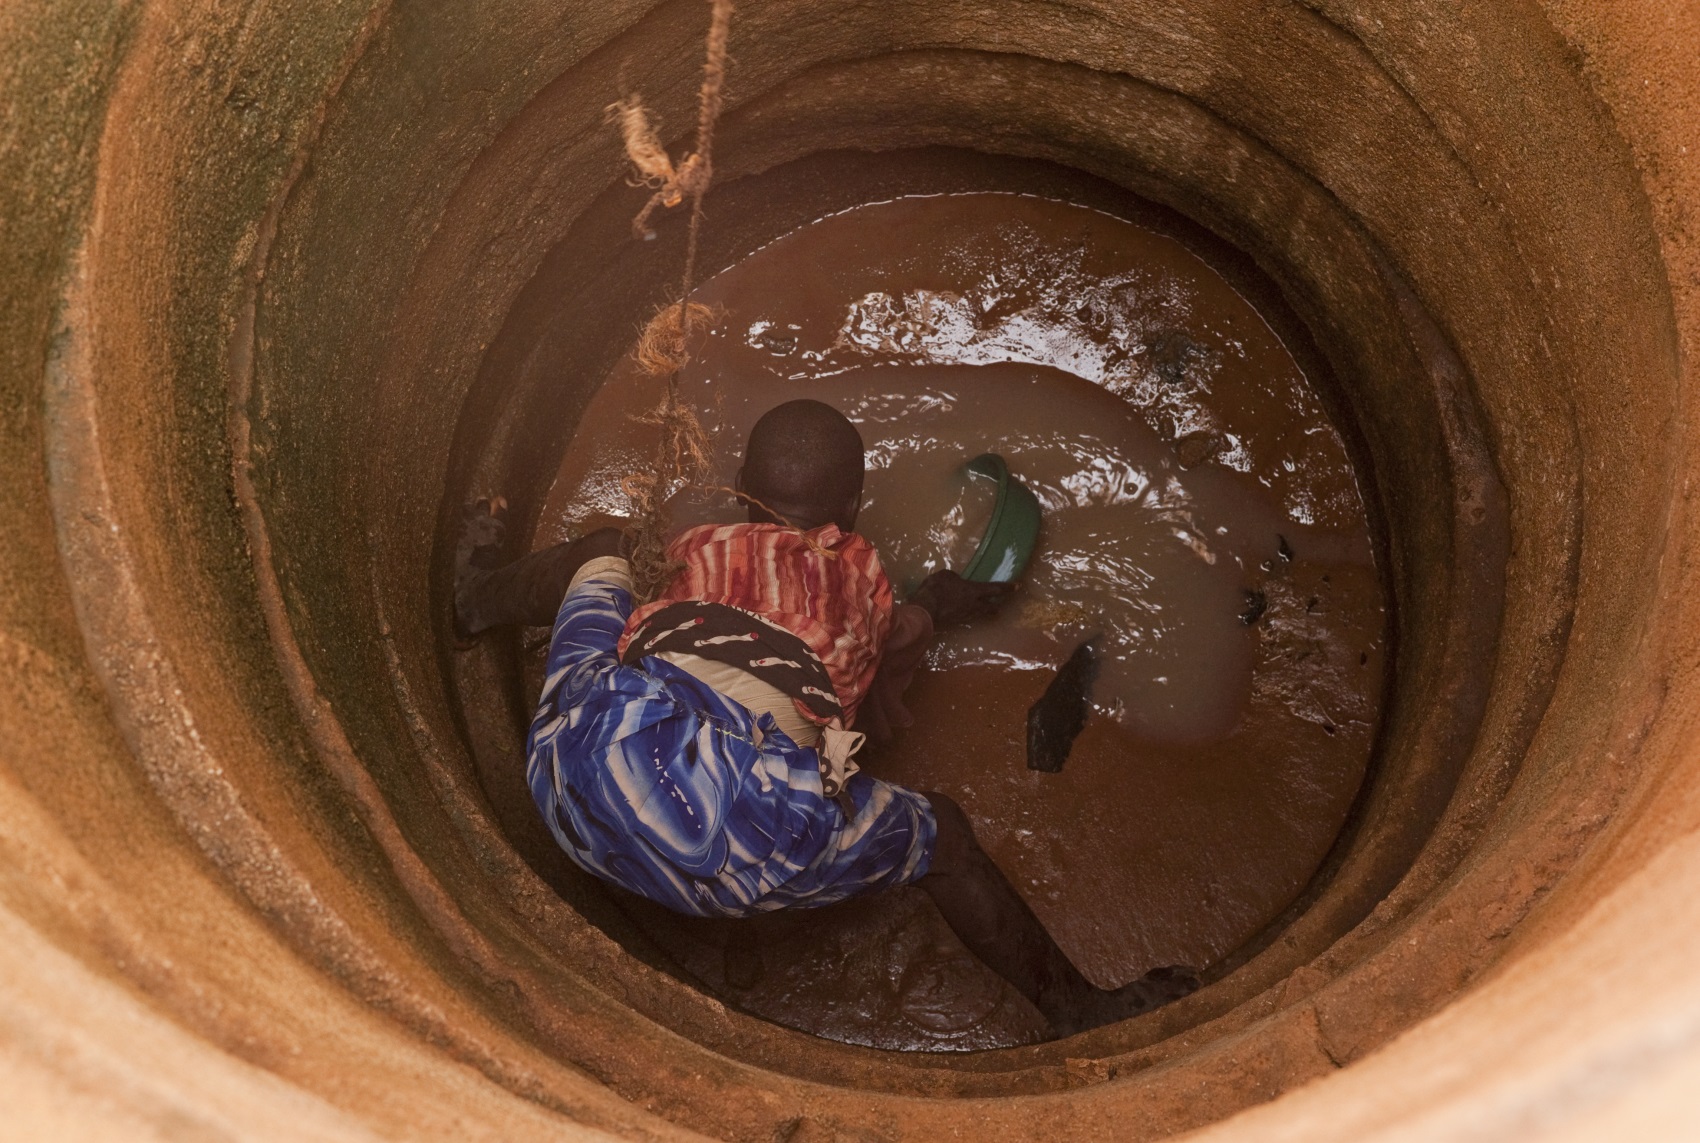 A Tanzanian teenager scoops up muddy water from a well.